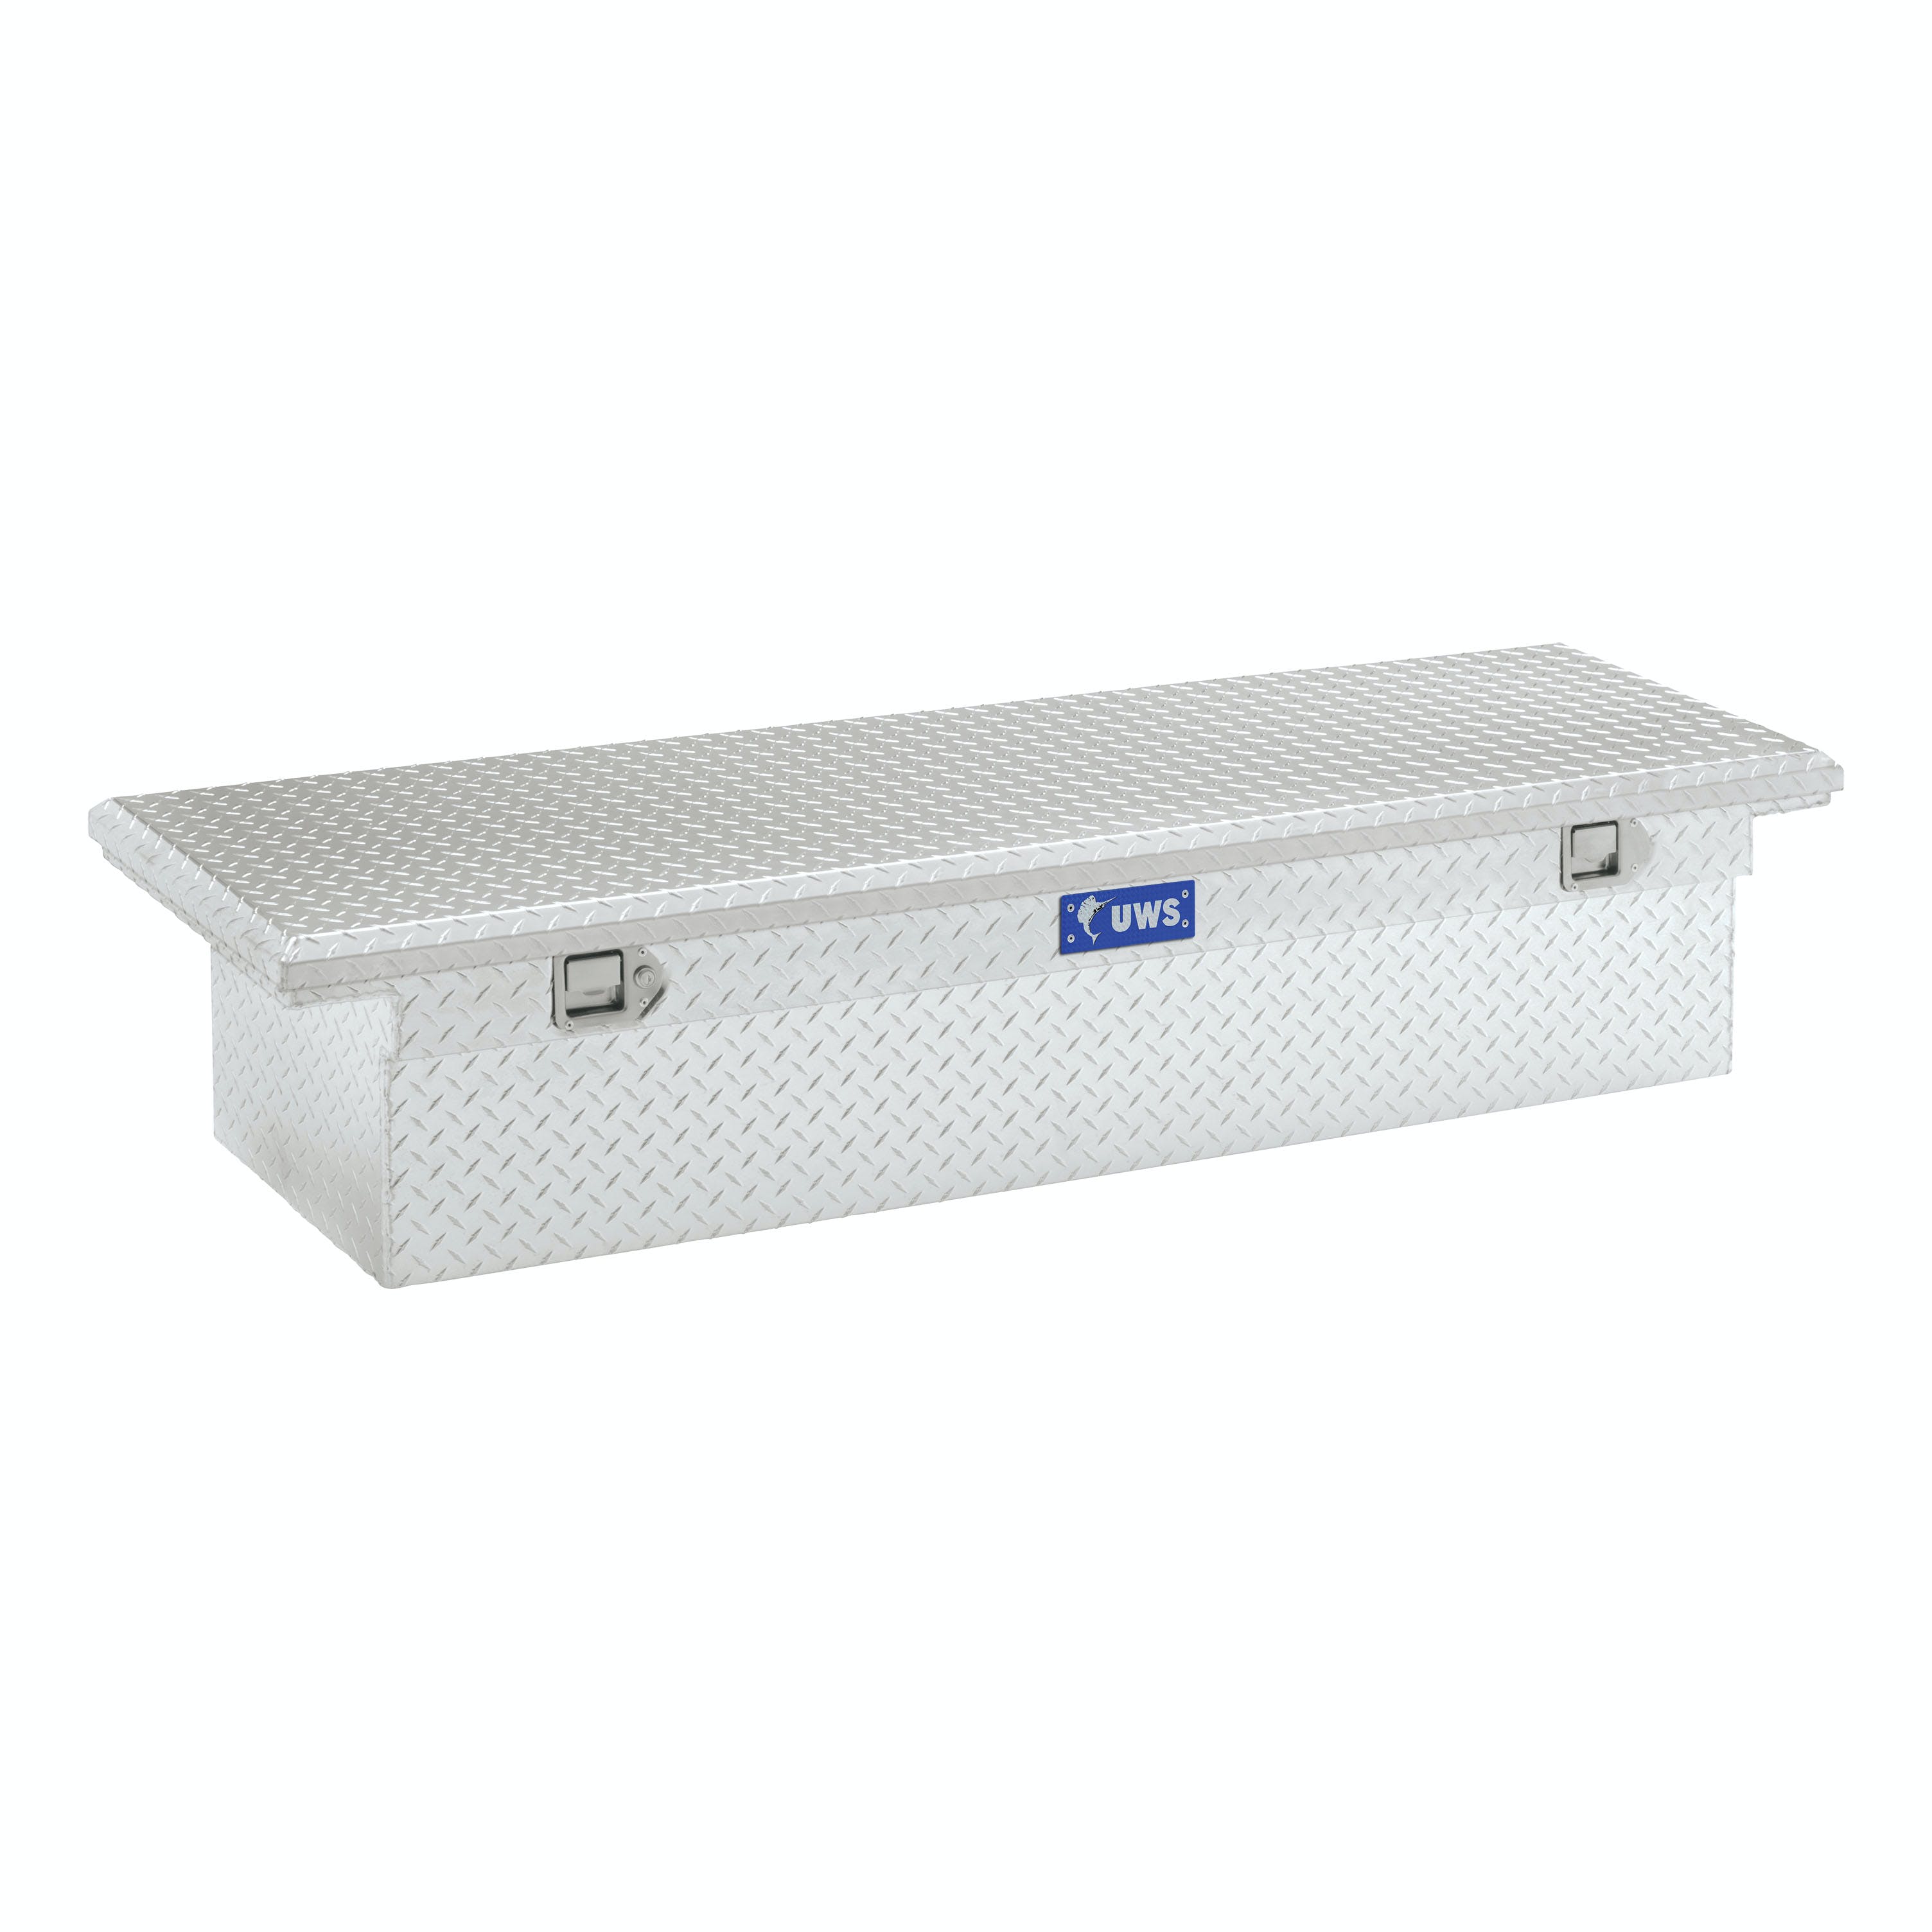 UWS TBS-72-LP 72 inch Aluminum Single Lid Crossover Toolbox Low Profile